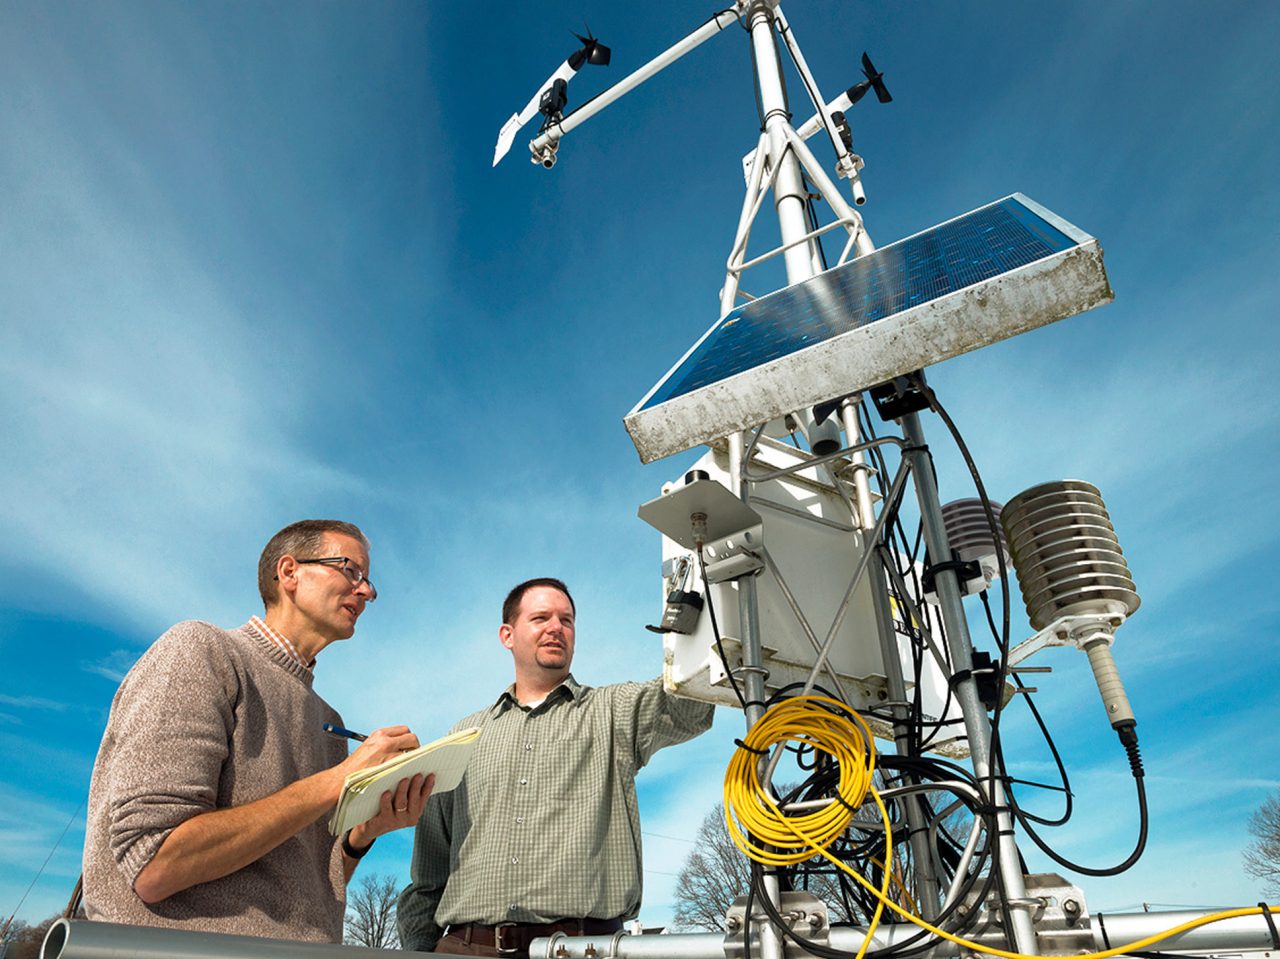 Professors Brinson and Leathers next to a DEOS weather station